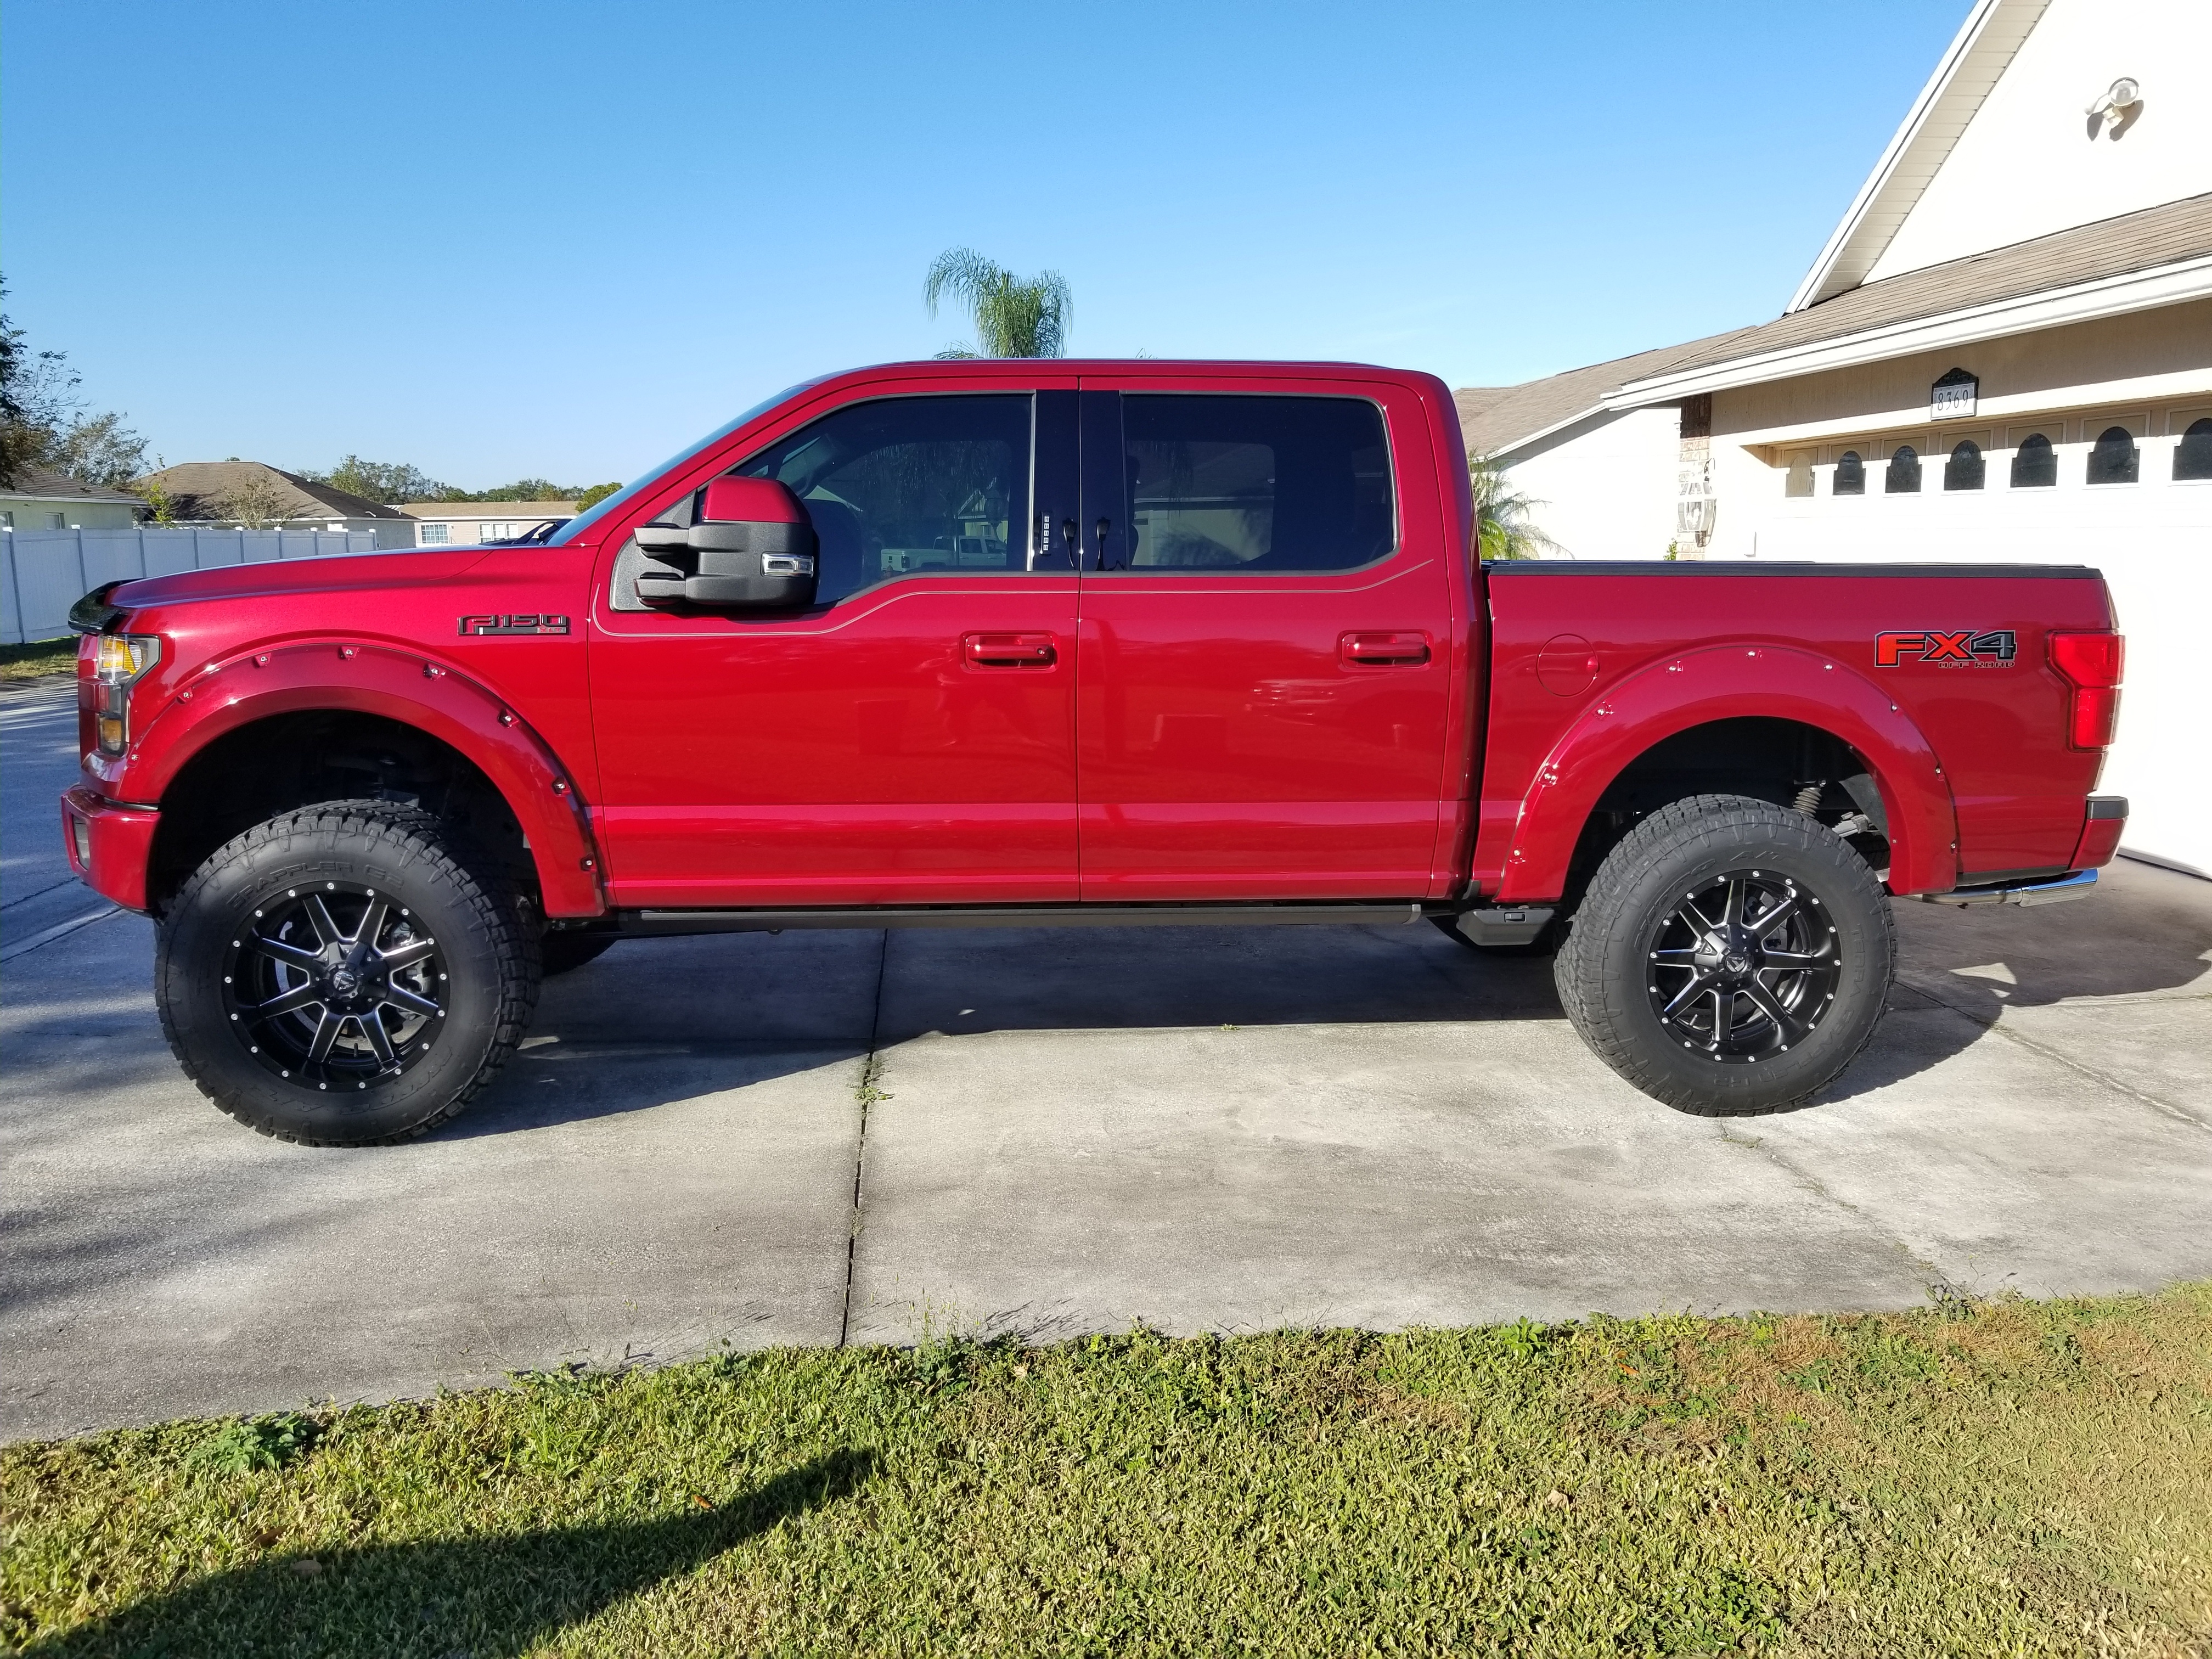 6” lift with 35s pics - Ford F150 Forum - Community of Ford Truck Fans